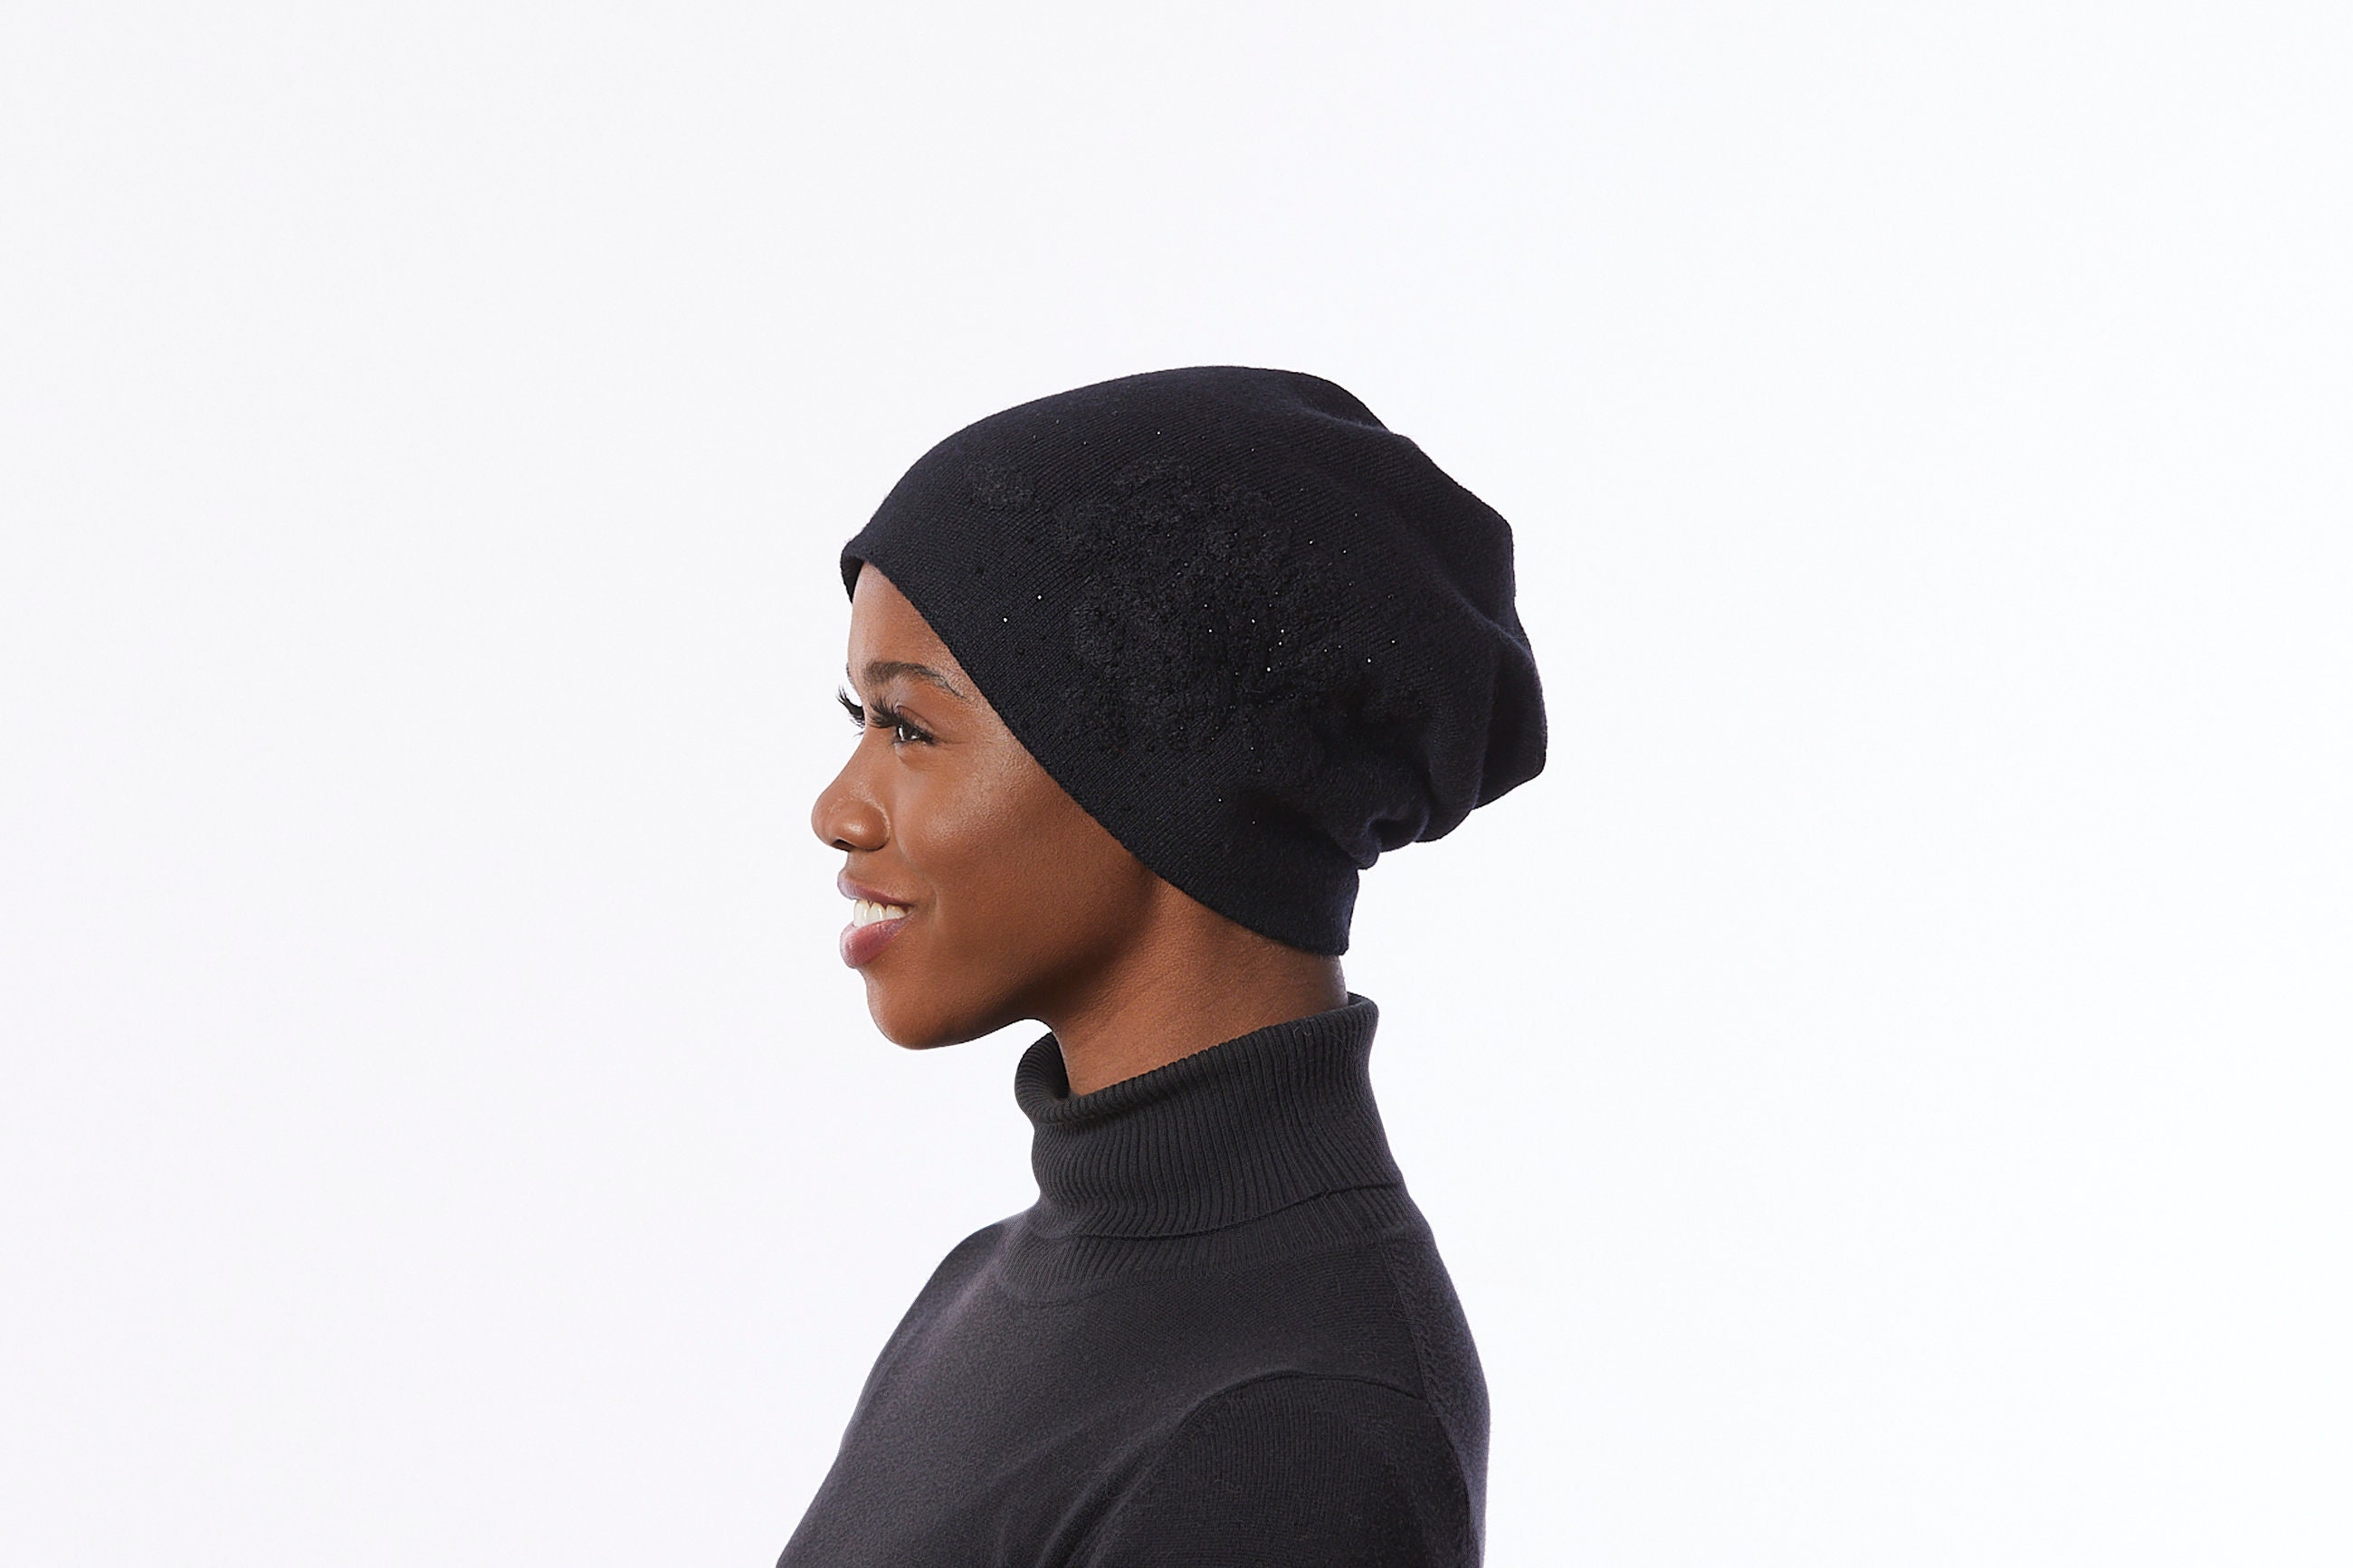 Cashmere Blend Hat in Black, Beanie Hat With Flower, Slouchy Winter Hat, Black Knit